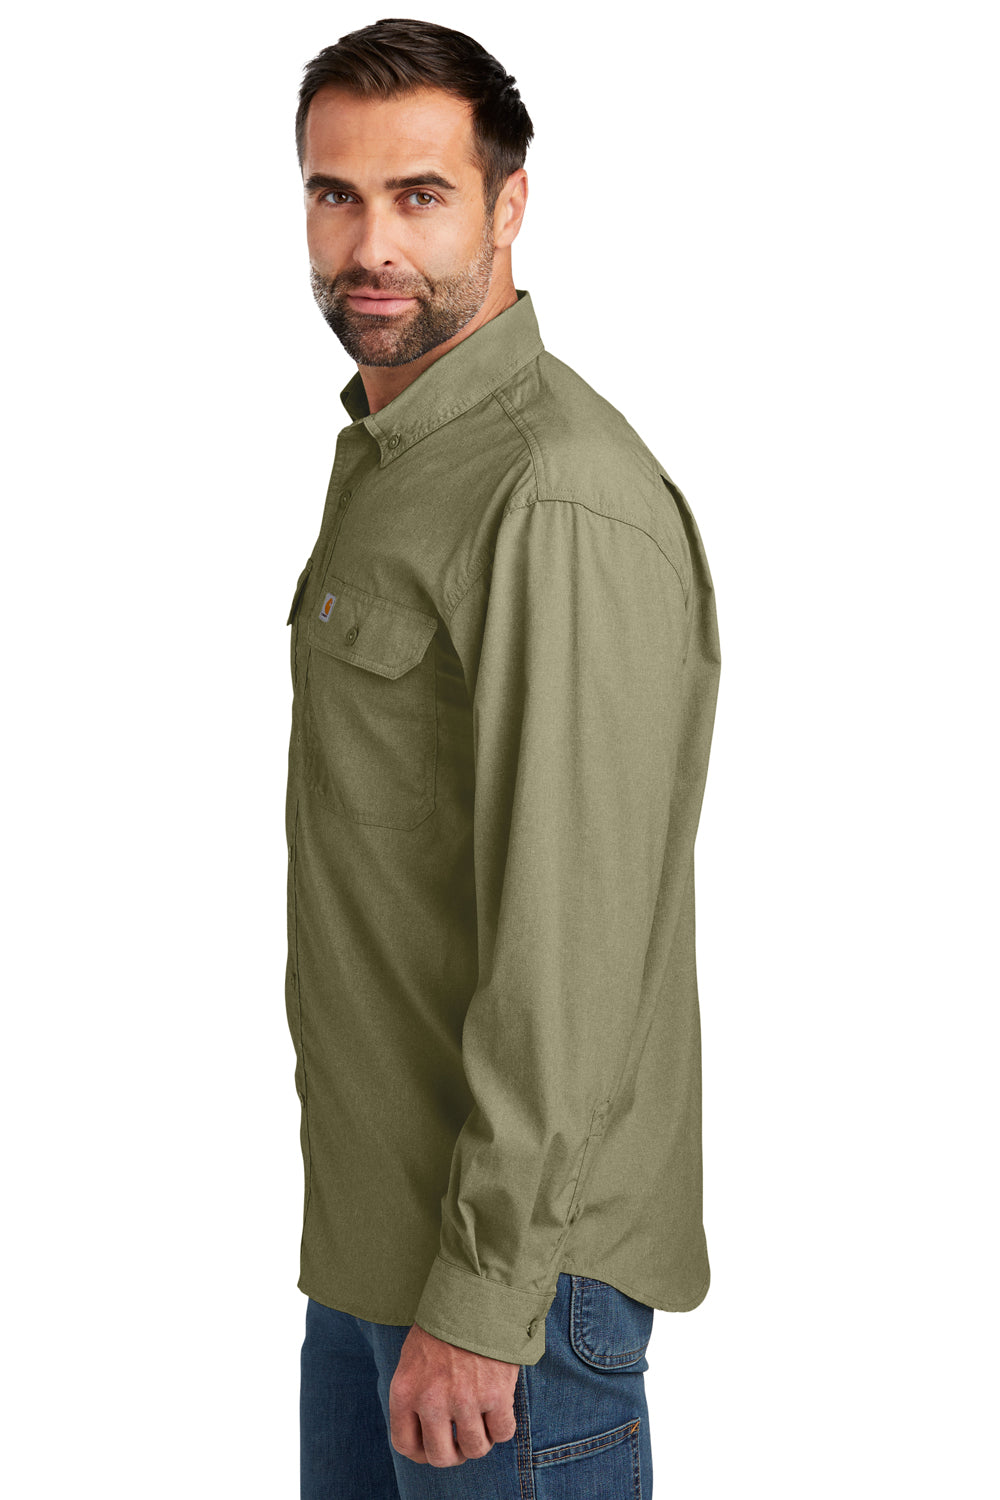 Carhartt CT105291 Mens Force Moisture Wicking Long Sleeve Button Down Shirt w/ Double Pockets Burnt Olive Green Model Side